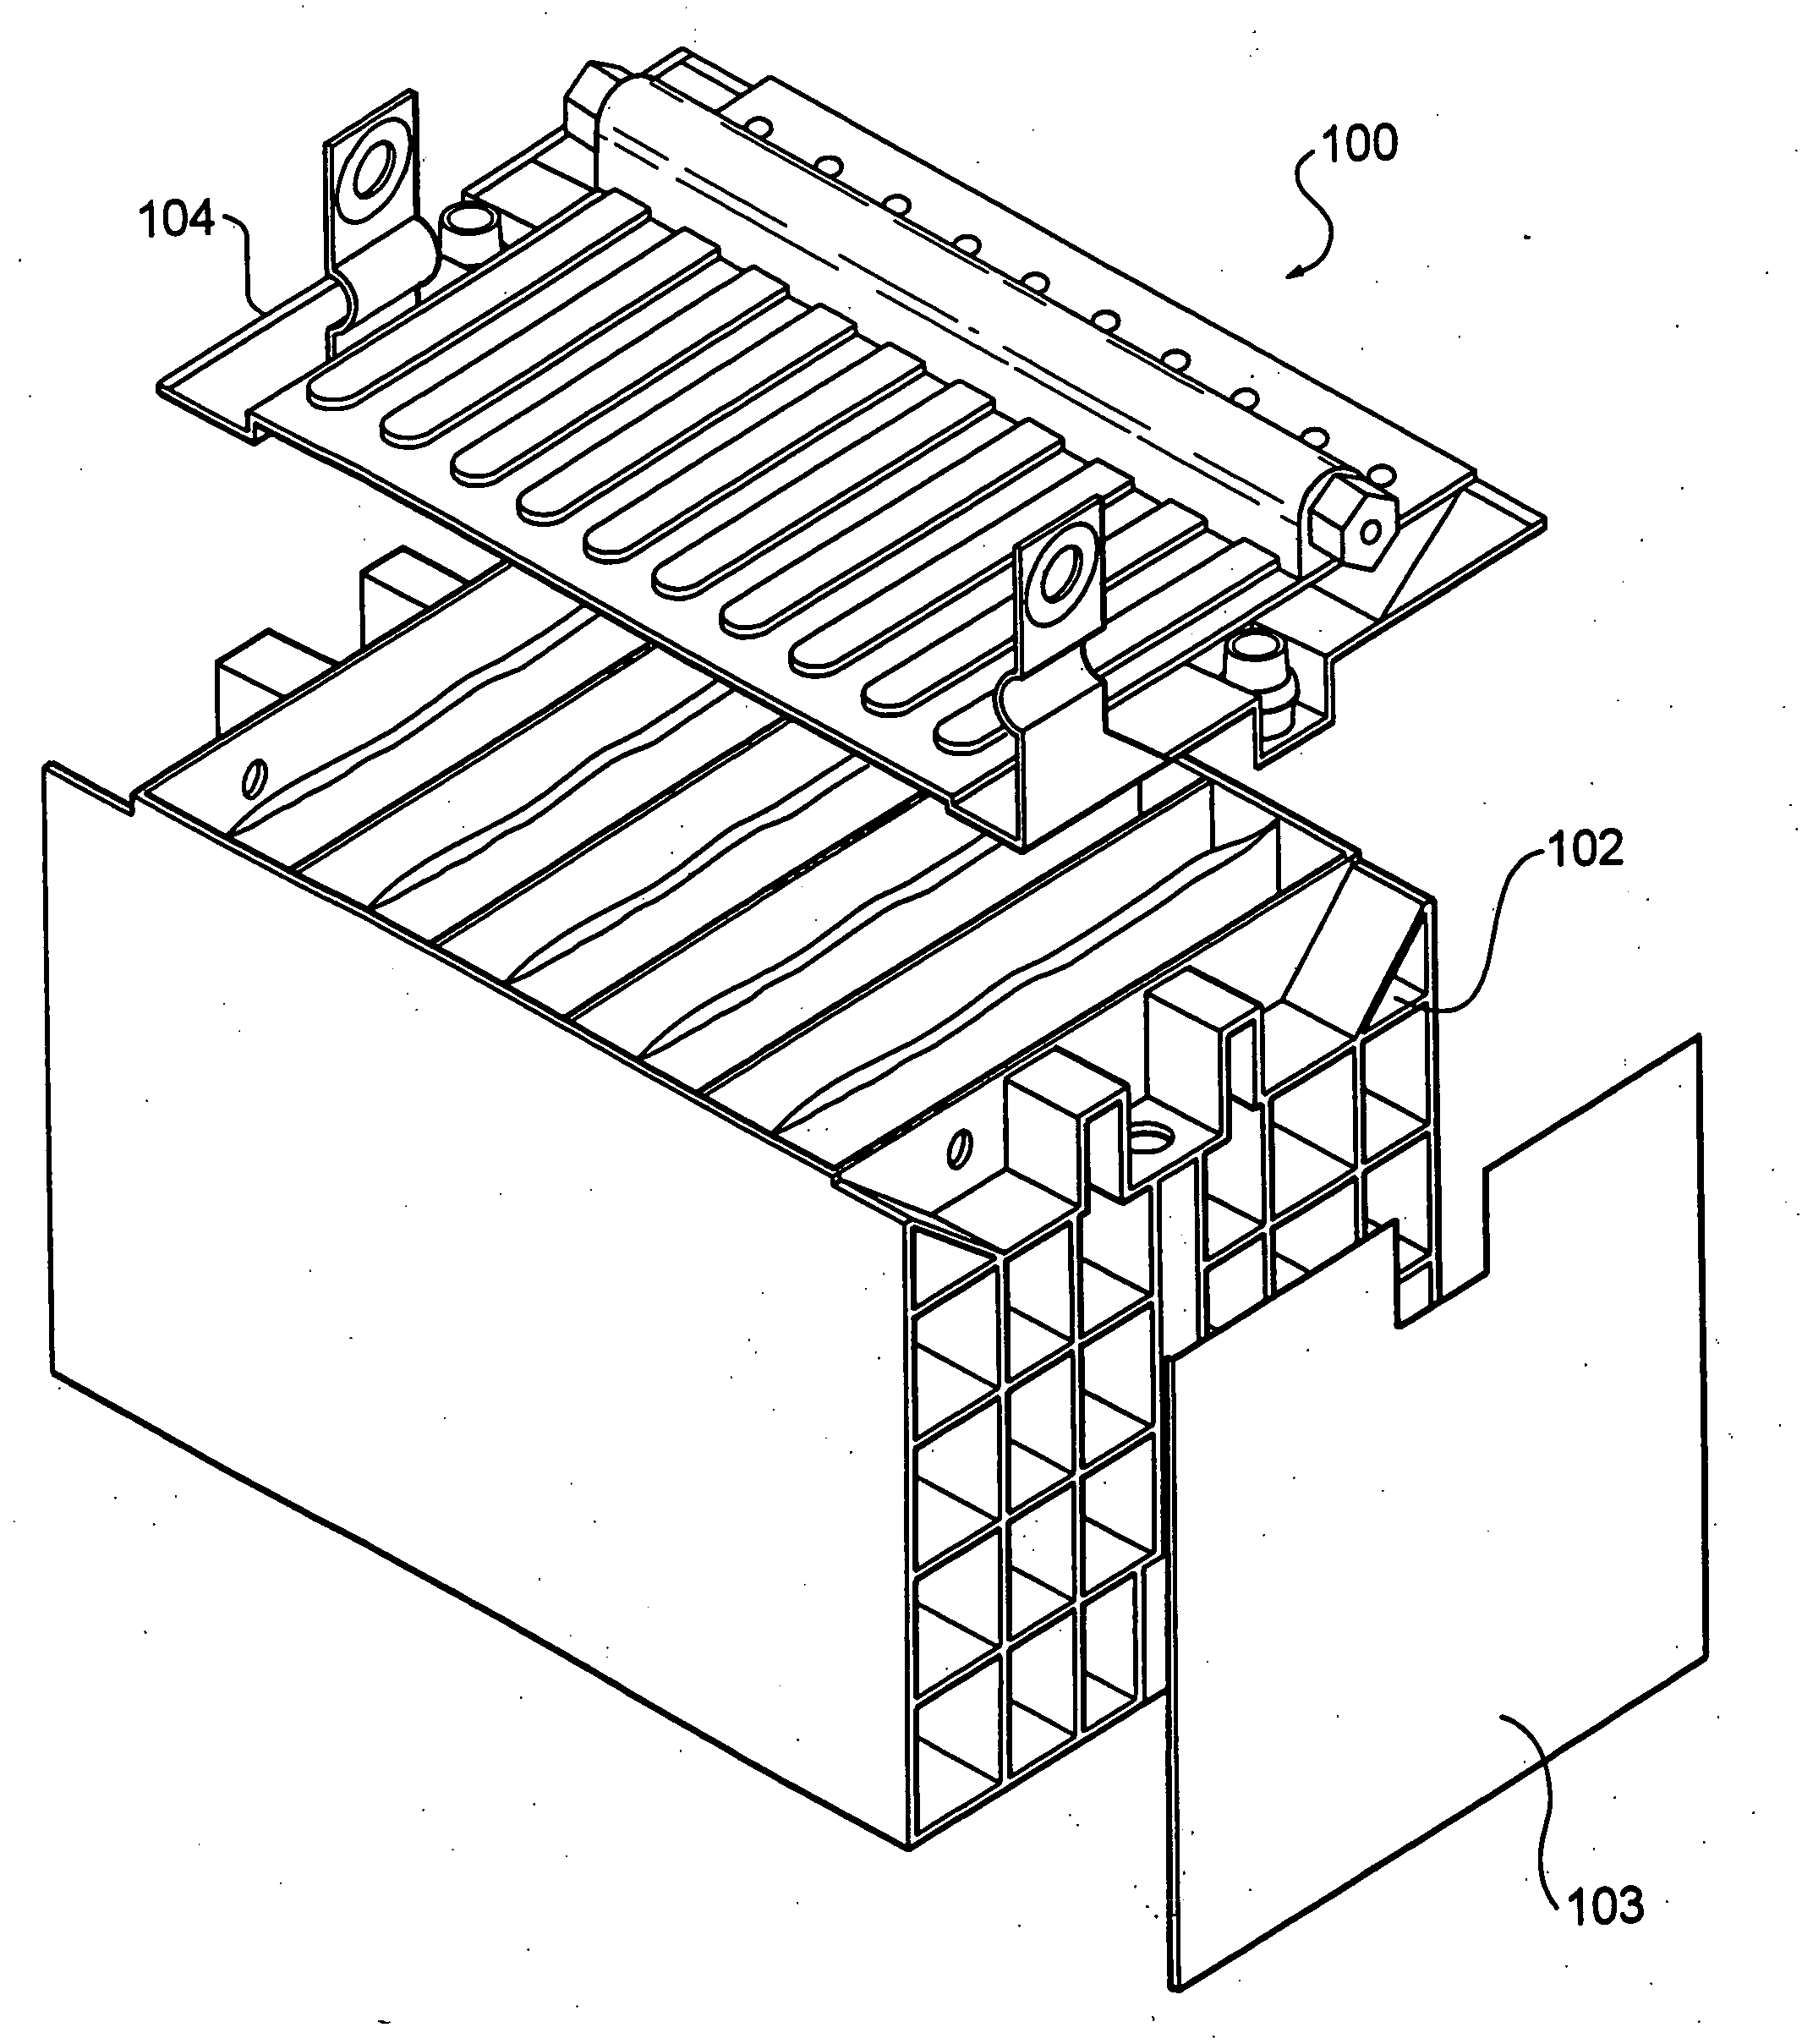 Multi-cell battery assembly